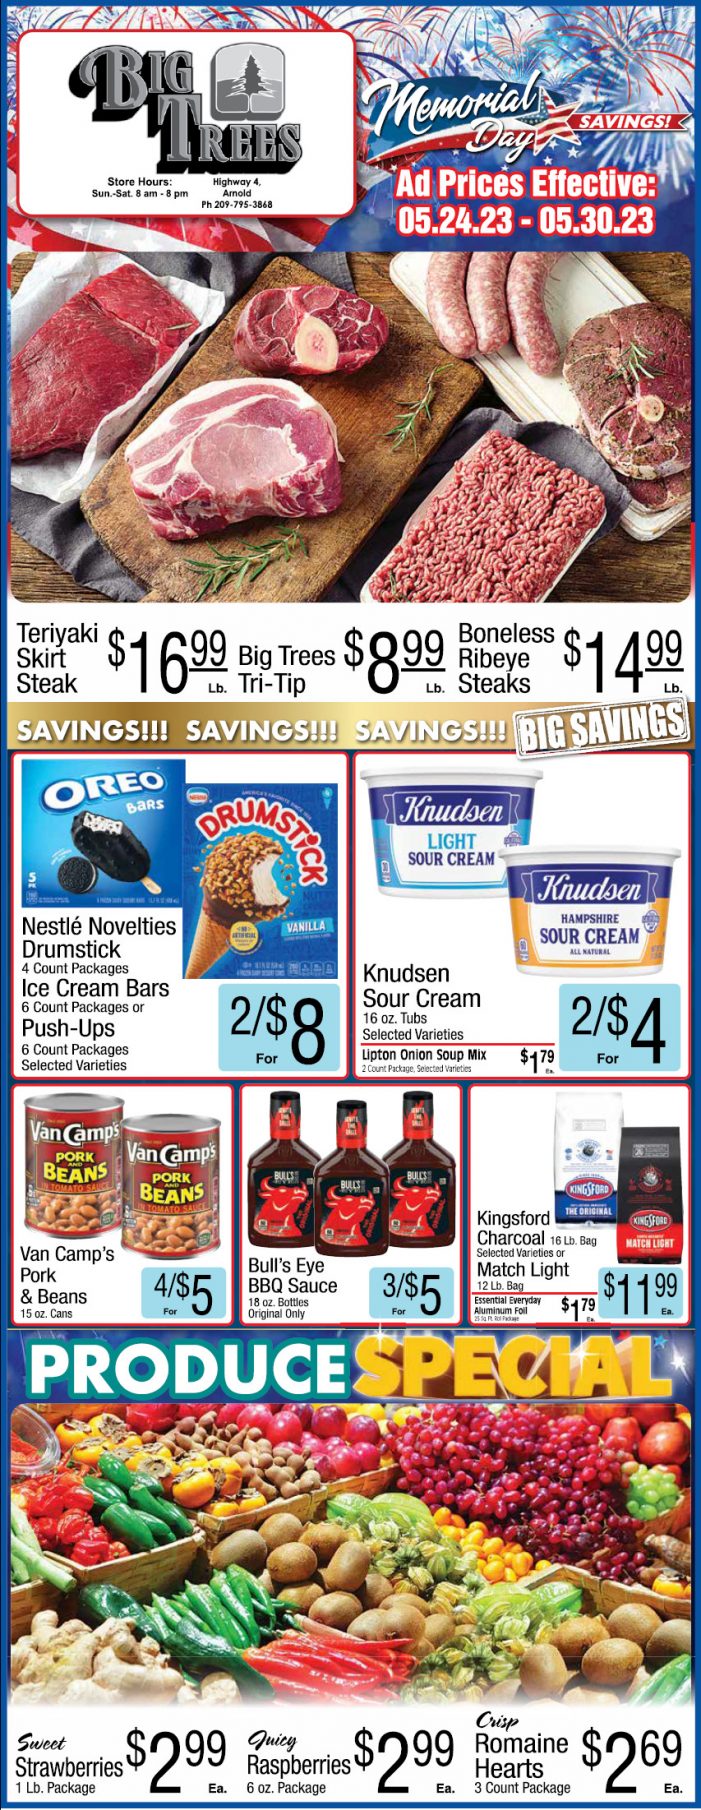 Big Trees Market Weekly Ad, Grocery, Produce, Meat & Deli Specials May 24 – 30!  Shop Local & Save!